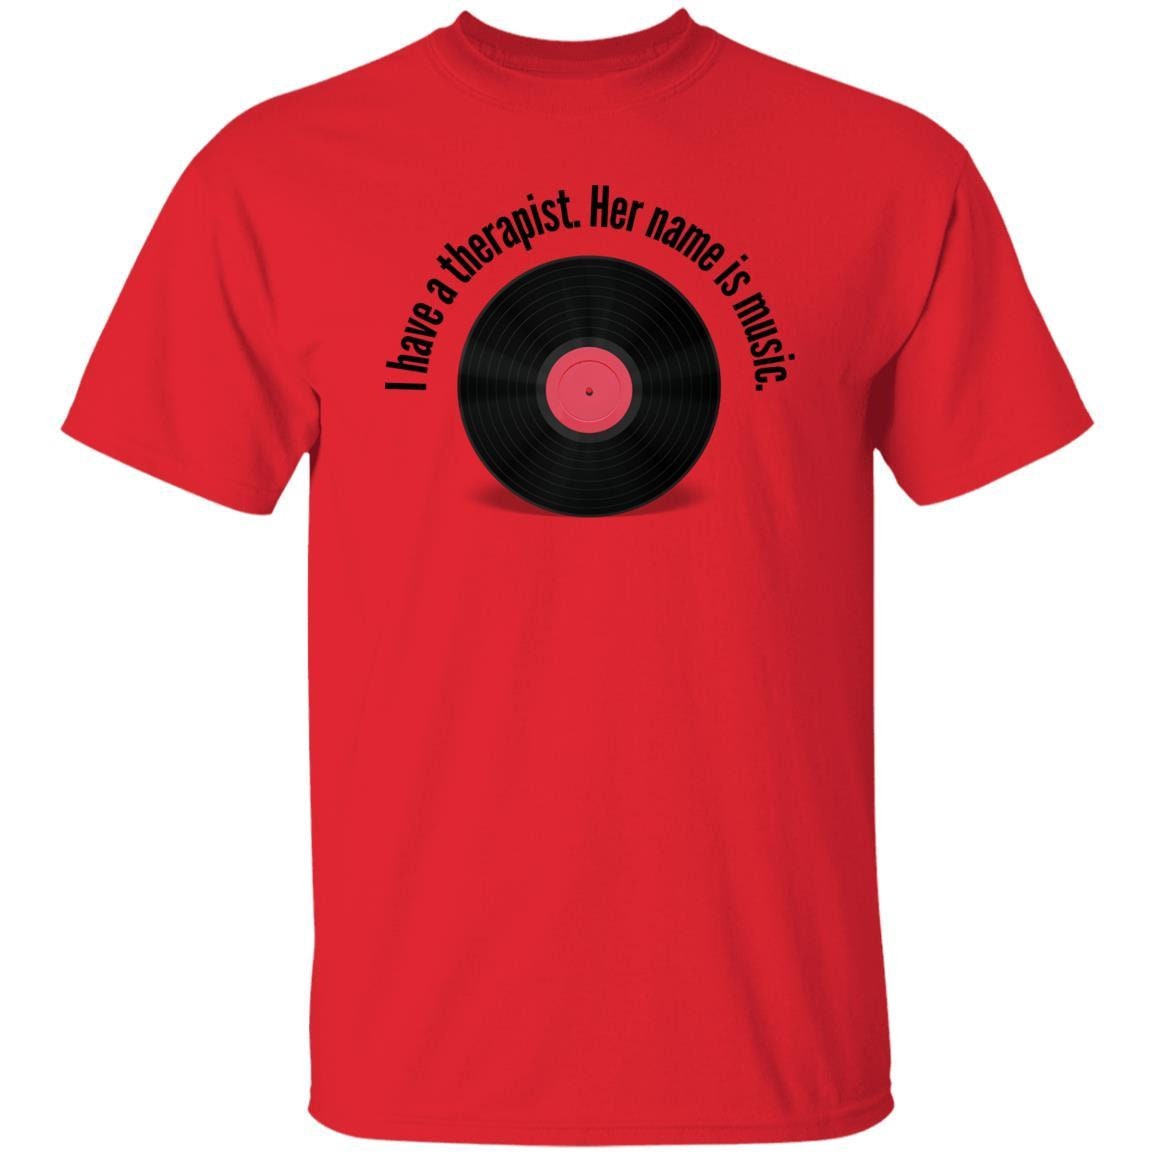 I have a therapist. Her name is music. T-Shirt